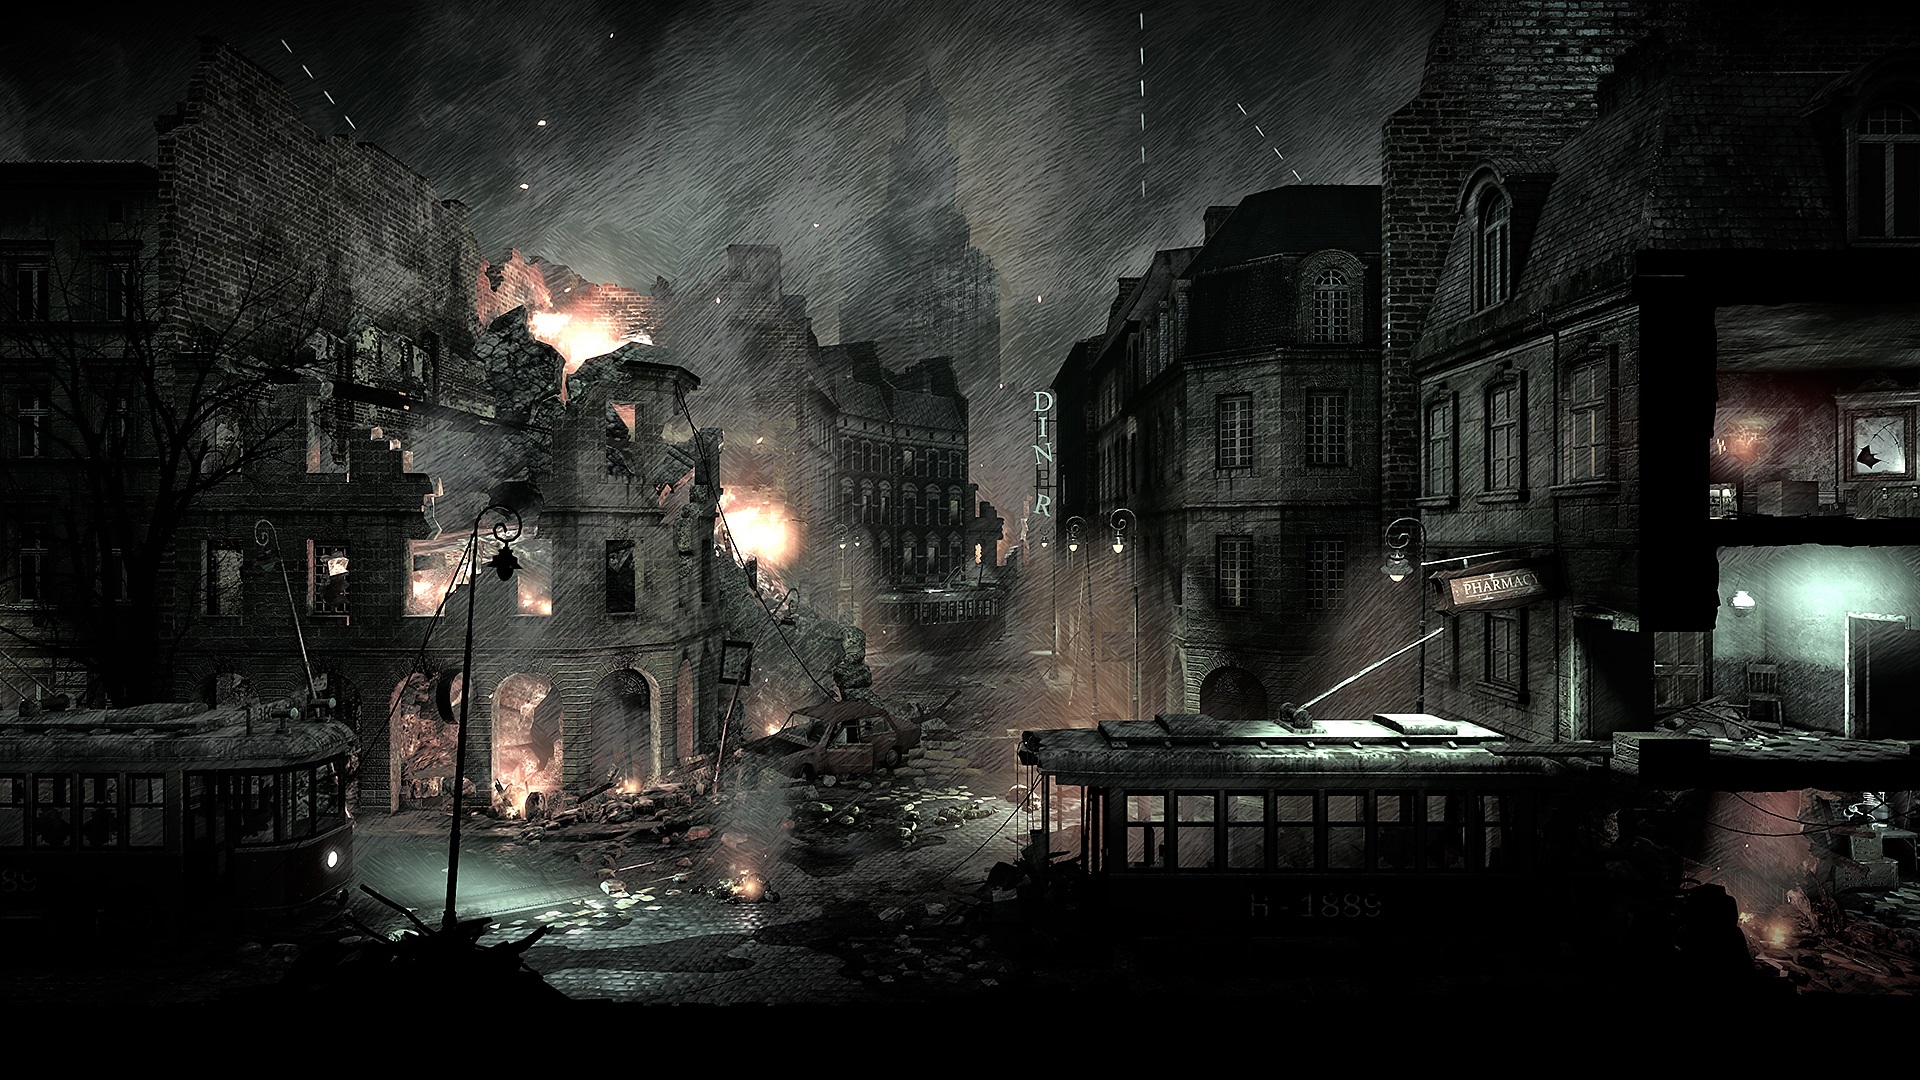 This War of Mine could be among the free games available through Games with Gold in February 2019.